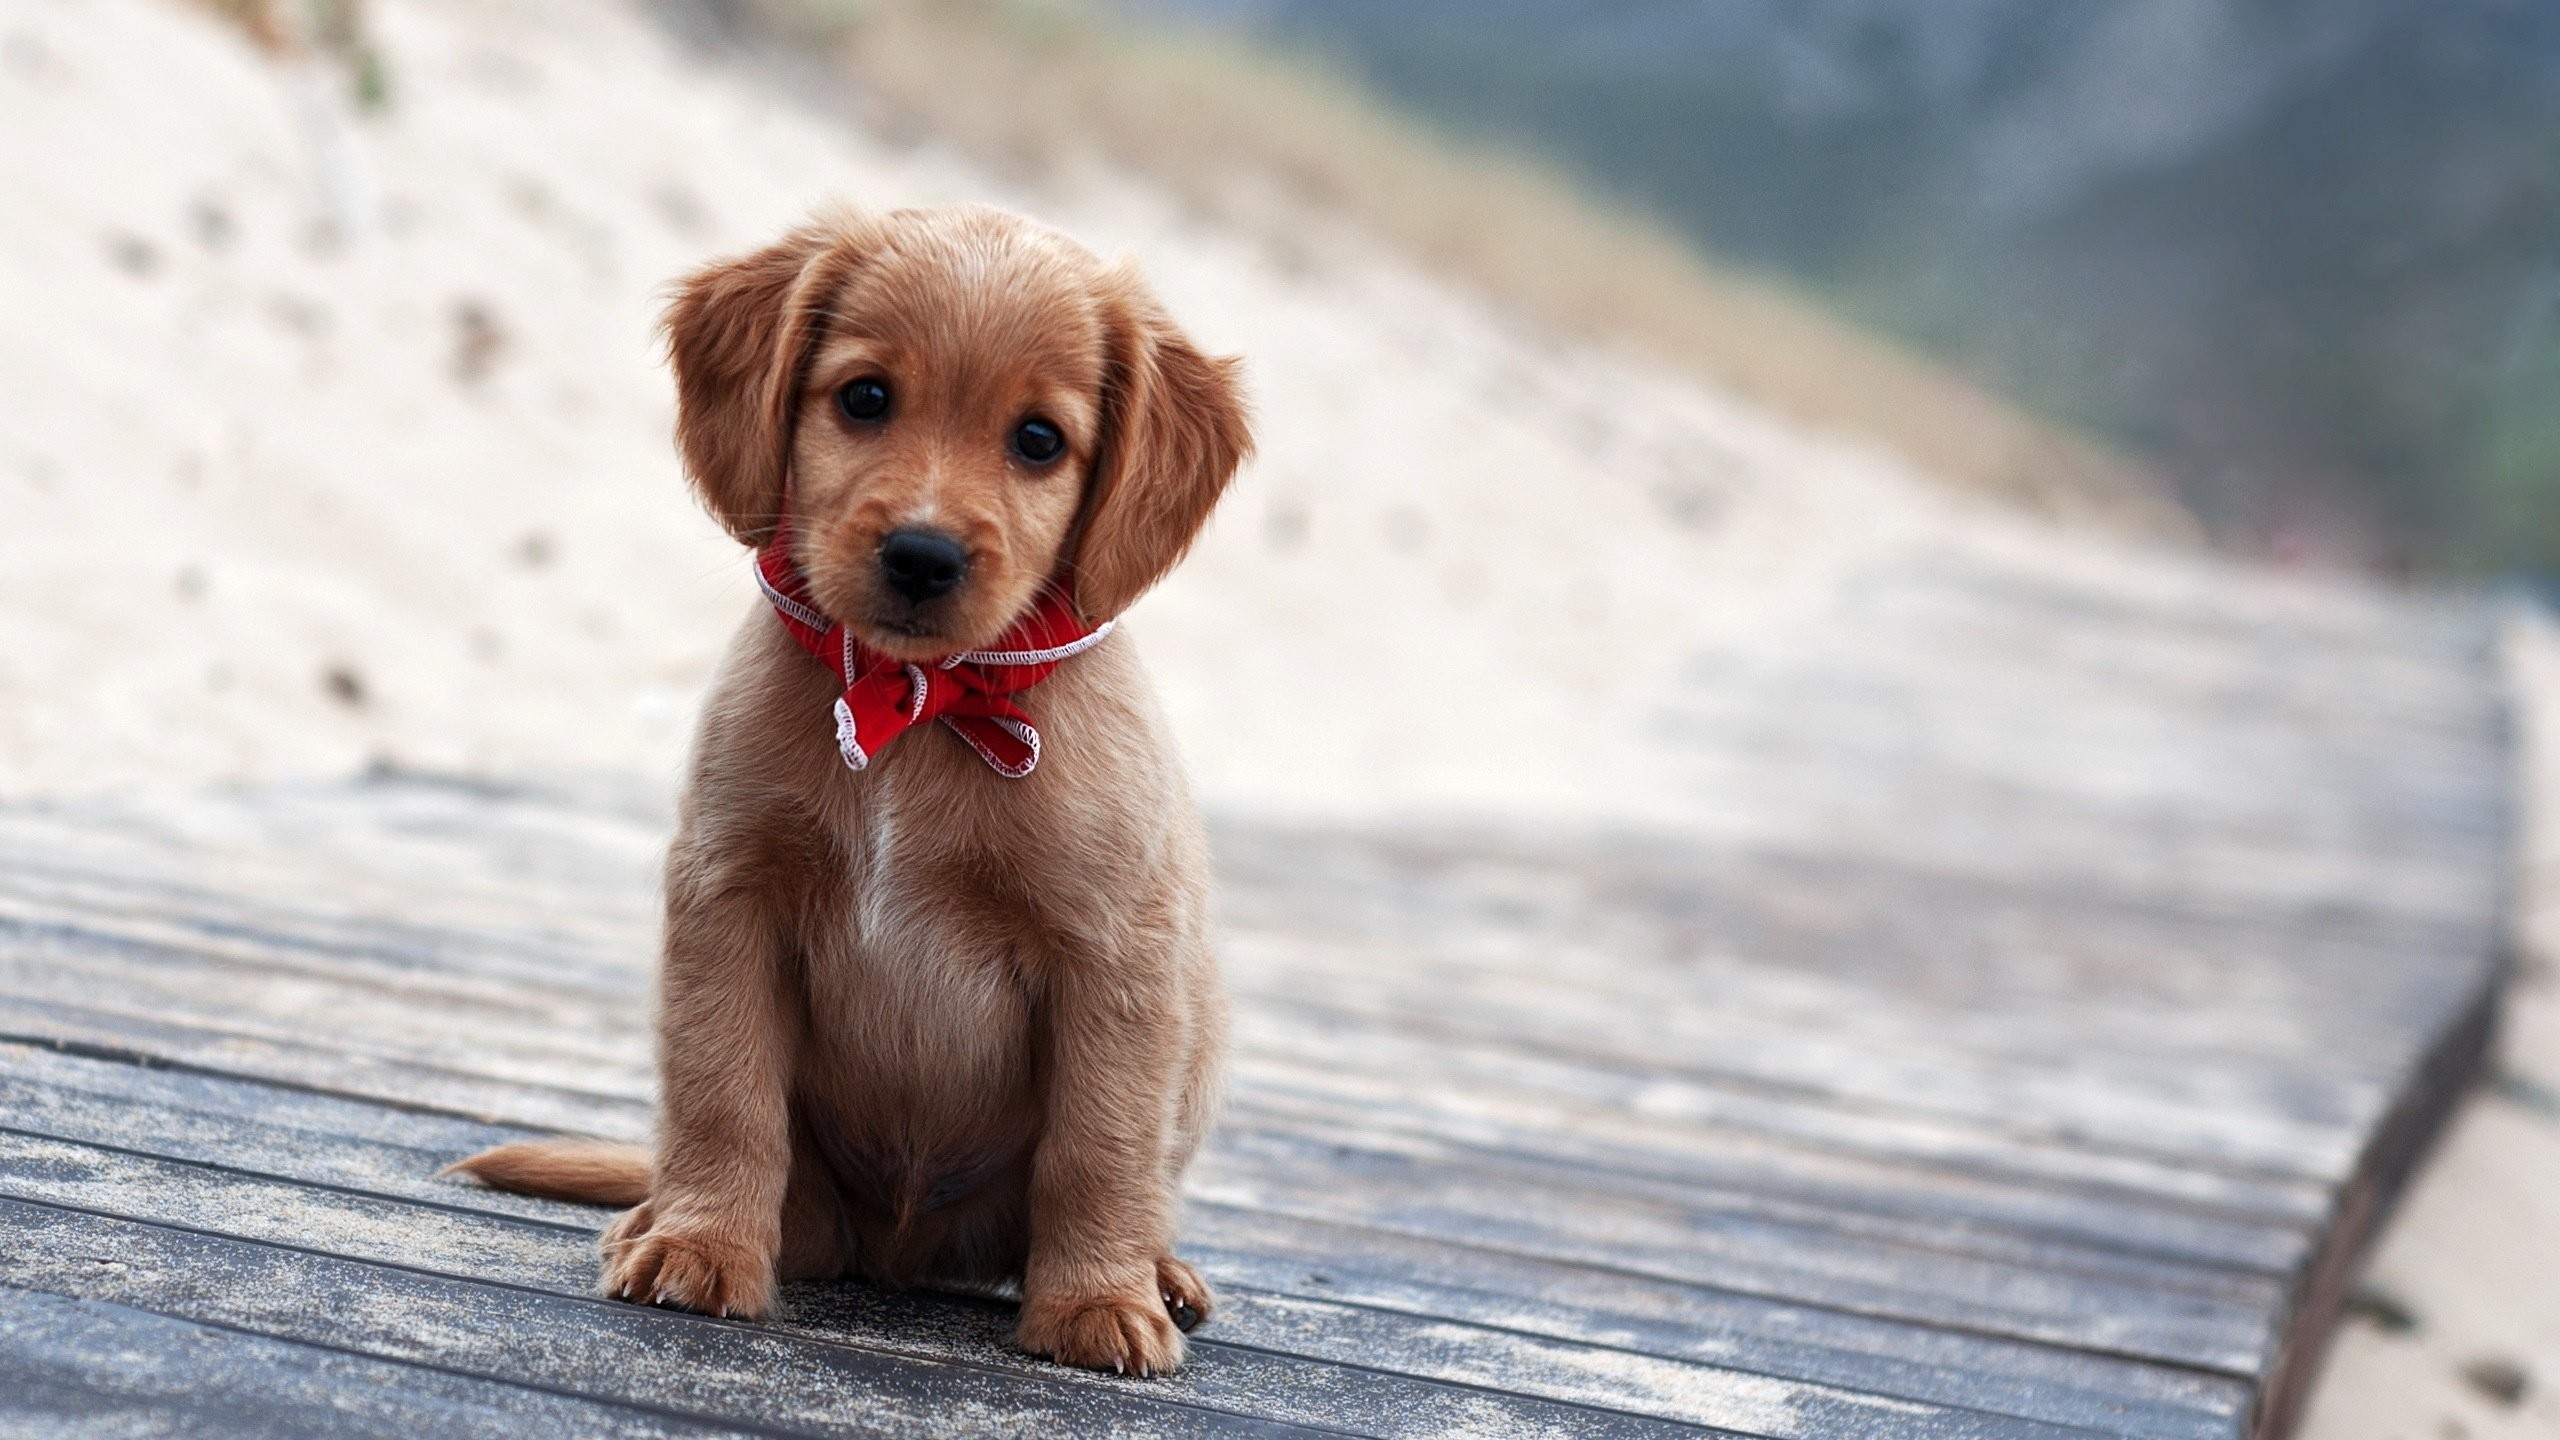 2560x1440 Cute Puppy Collection For Screensaver On Wallpaper Free High